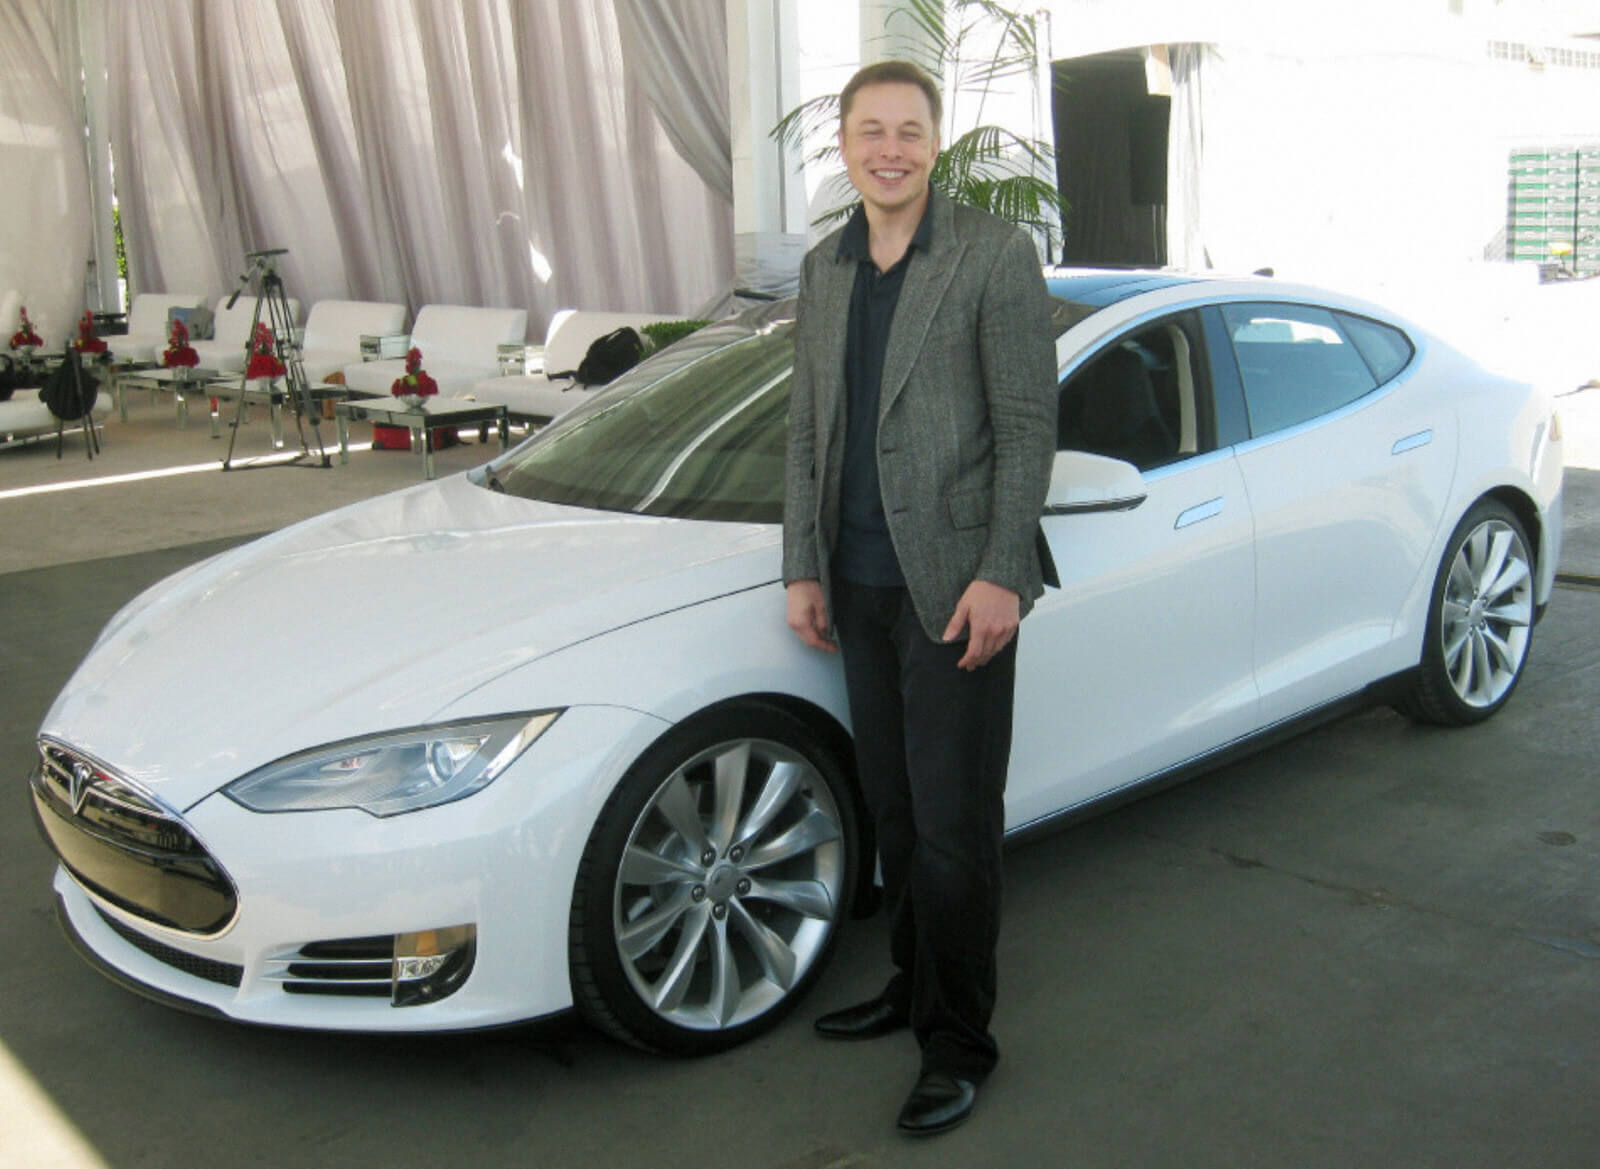 Musk shows off the Model S